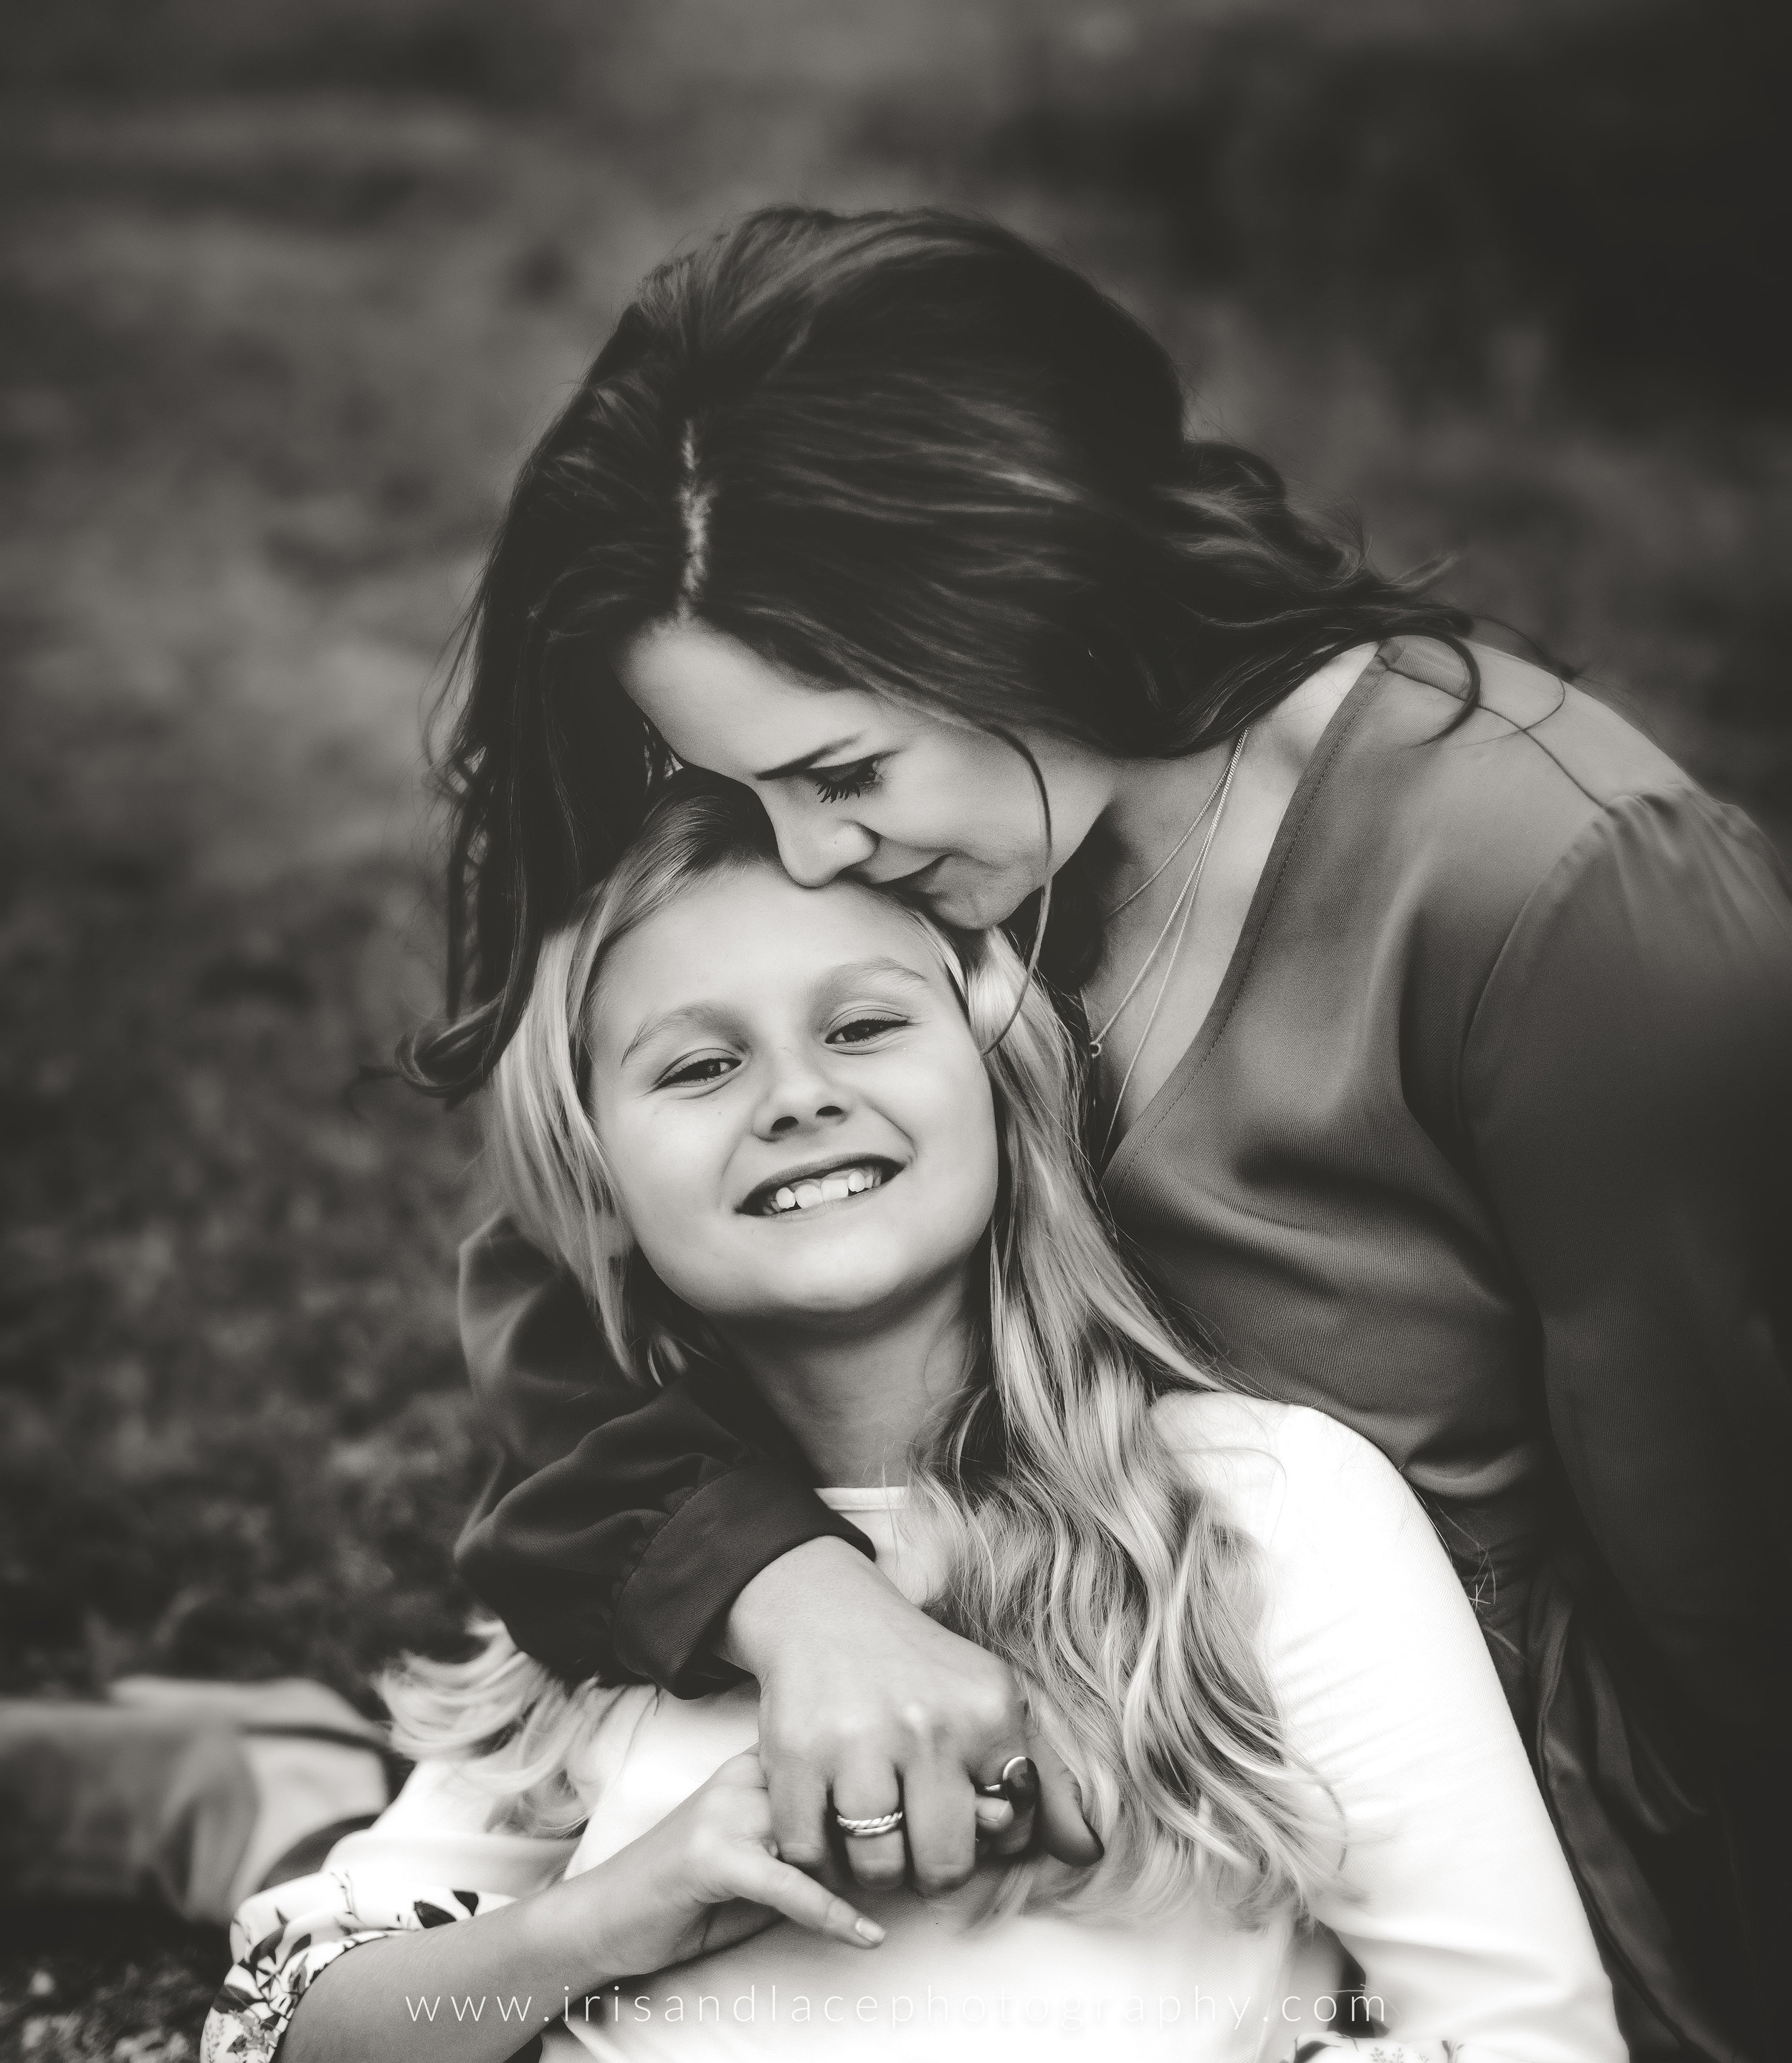 Black and white image of mother and daughter snuggling